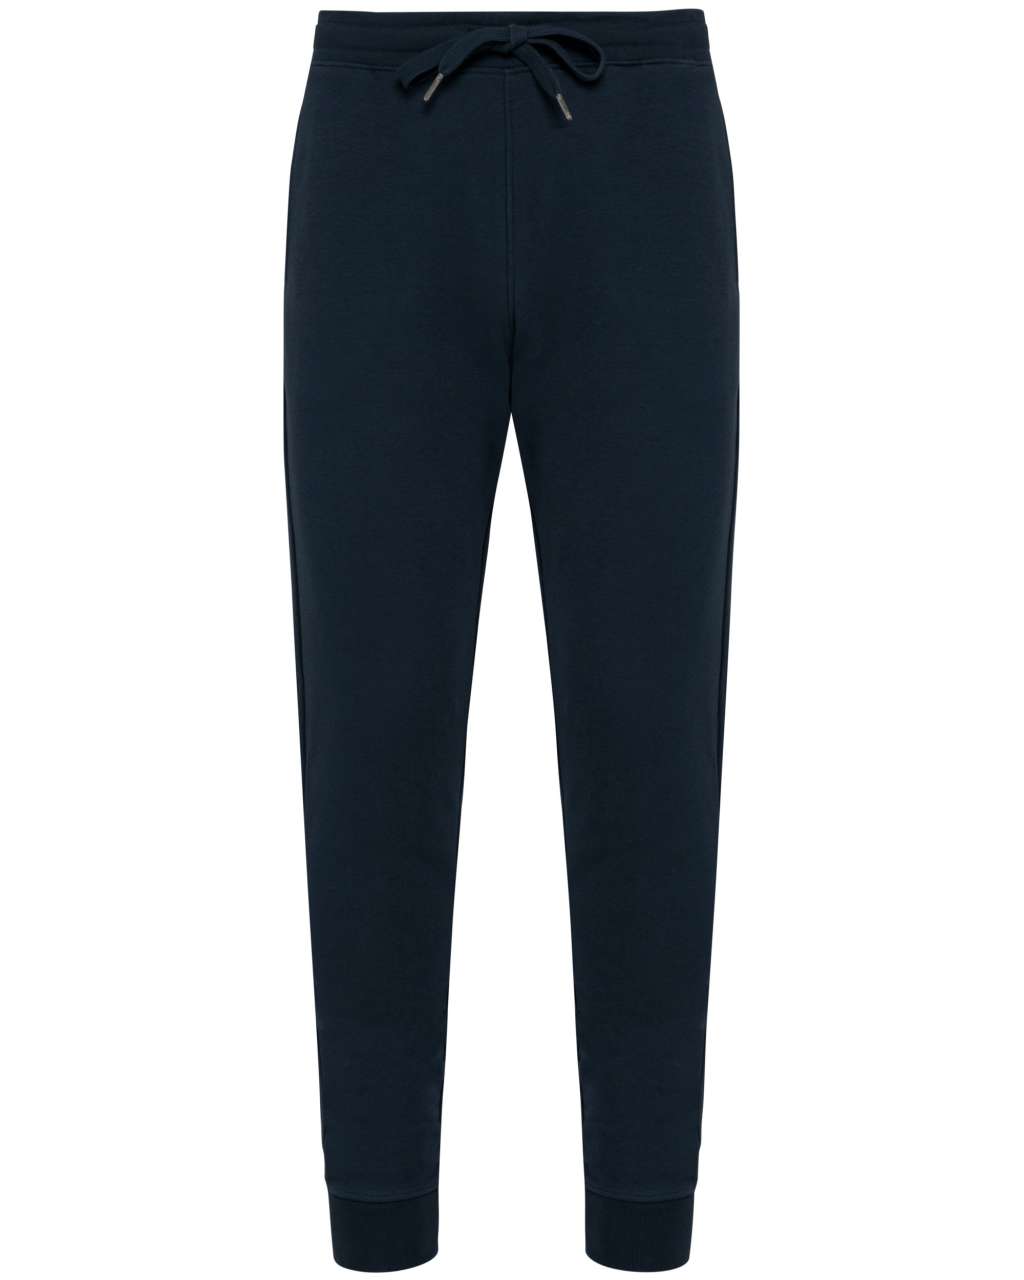 MEN'S ECO-FRIENDLY FRENCH TERRY TROUSERS